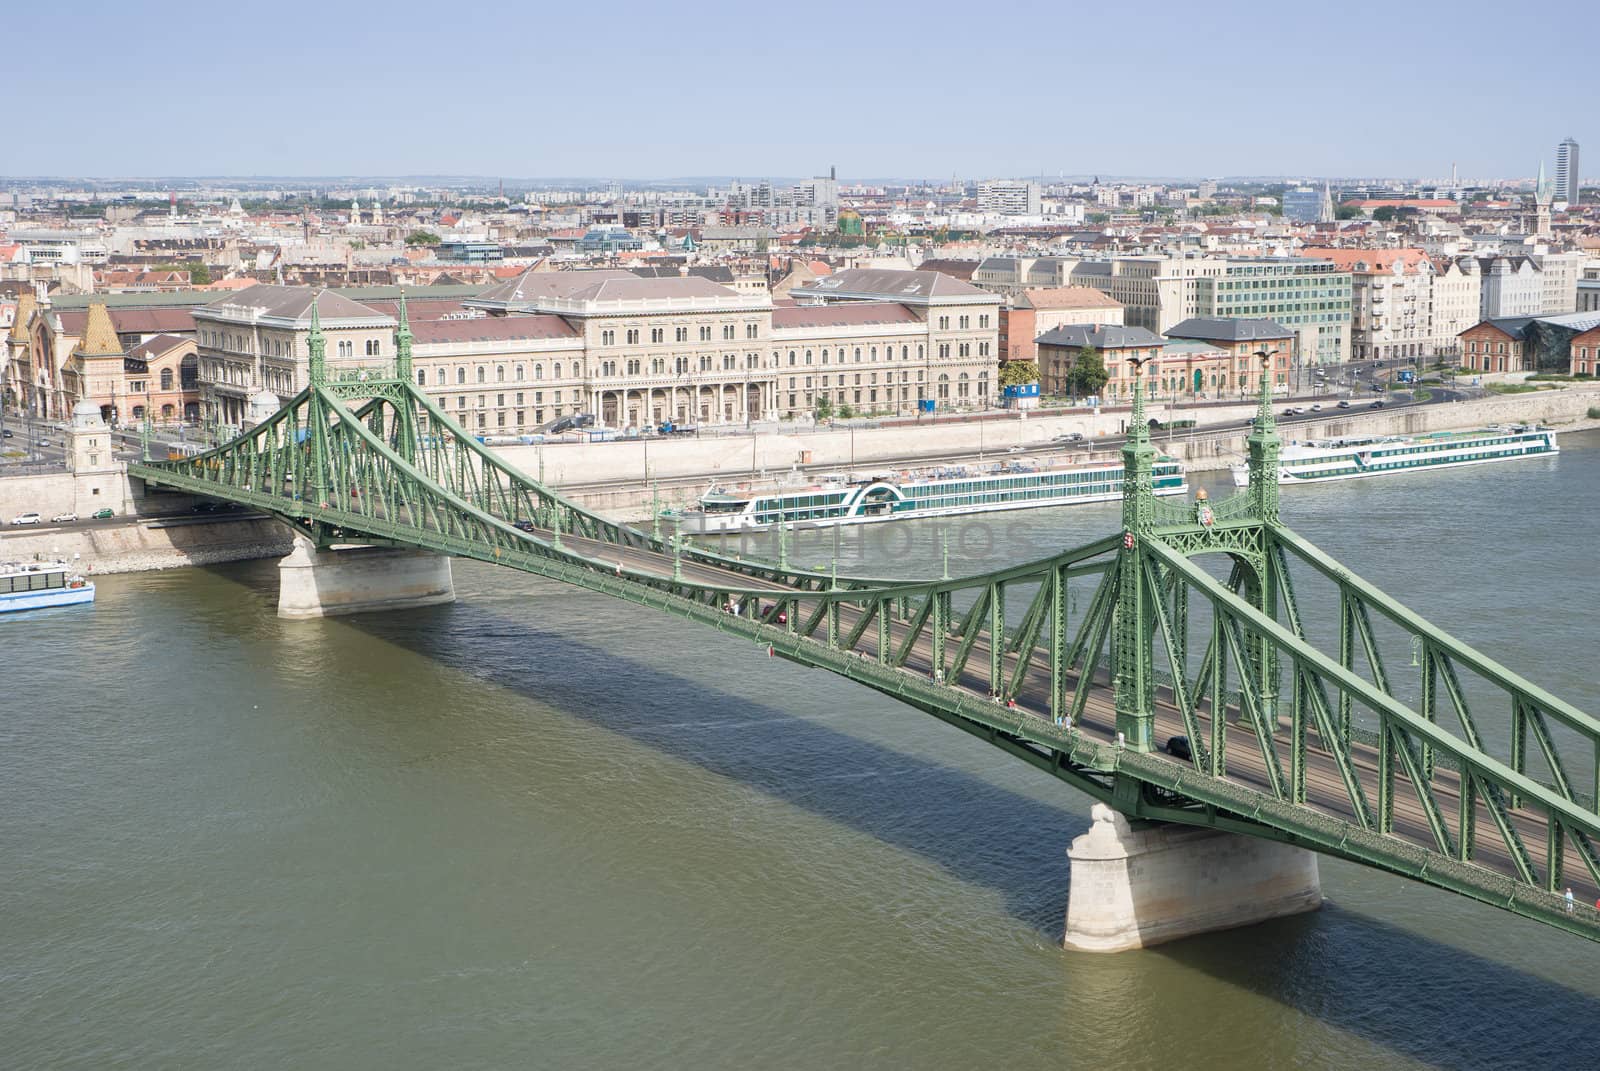 view of the Danube river in the city of Budapest in Hungary